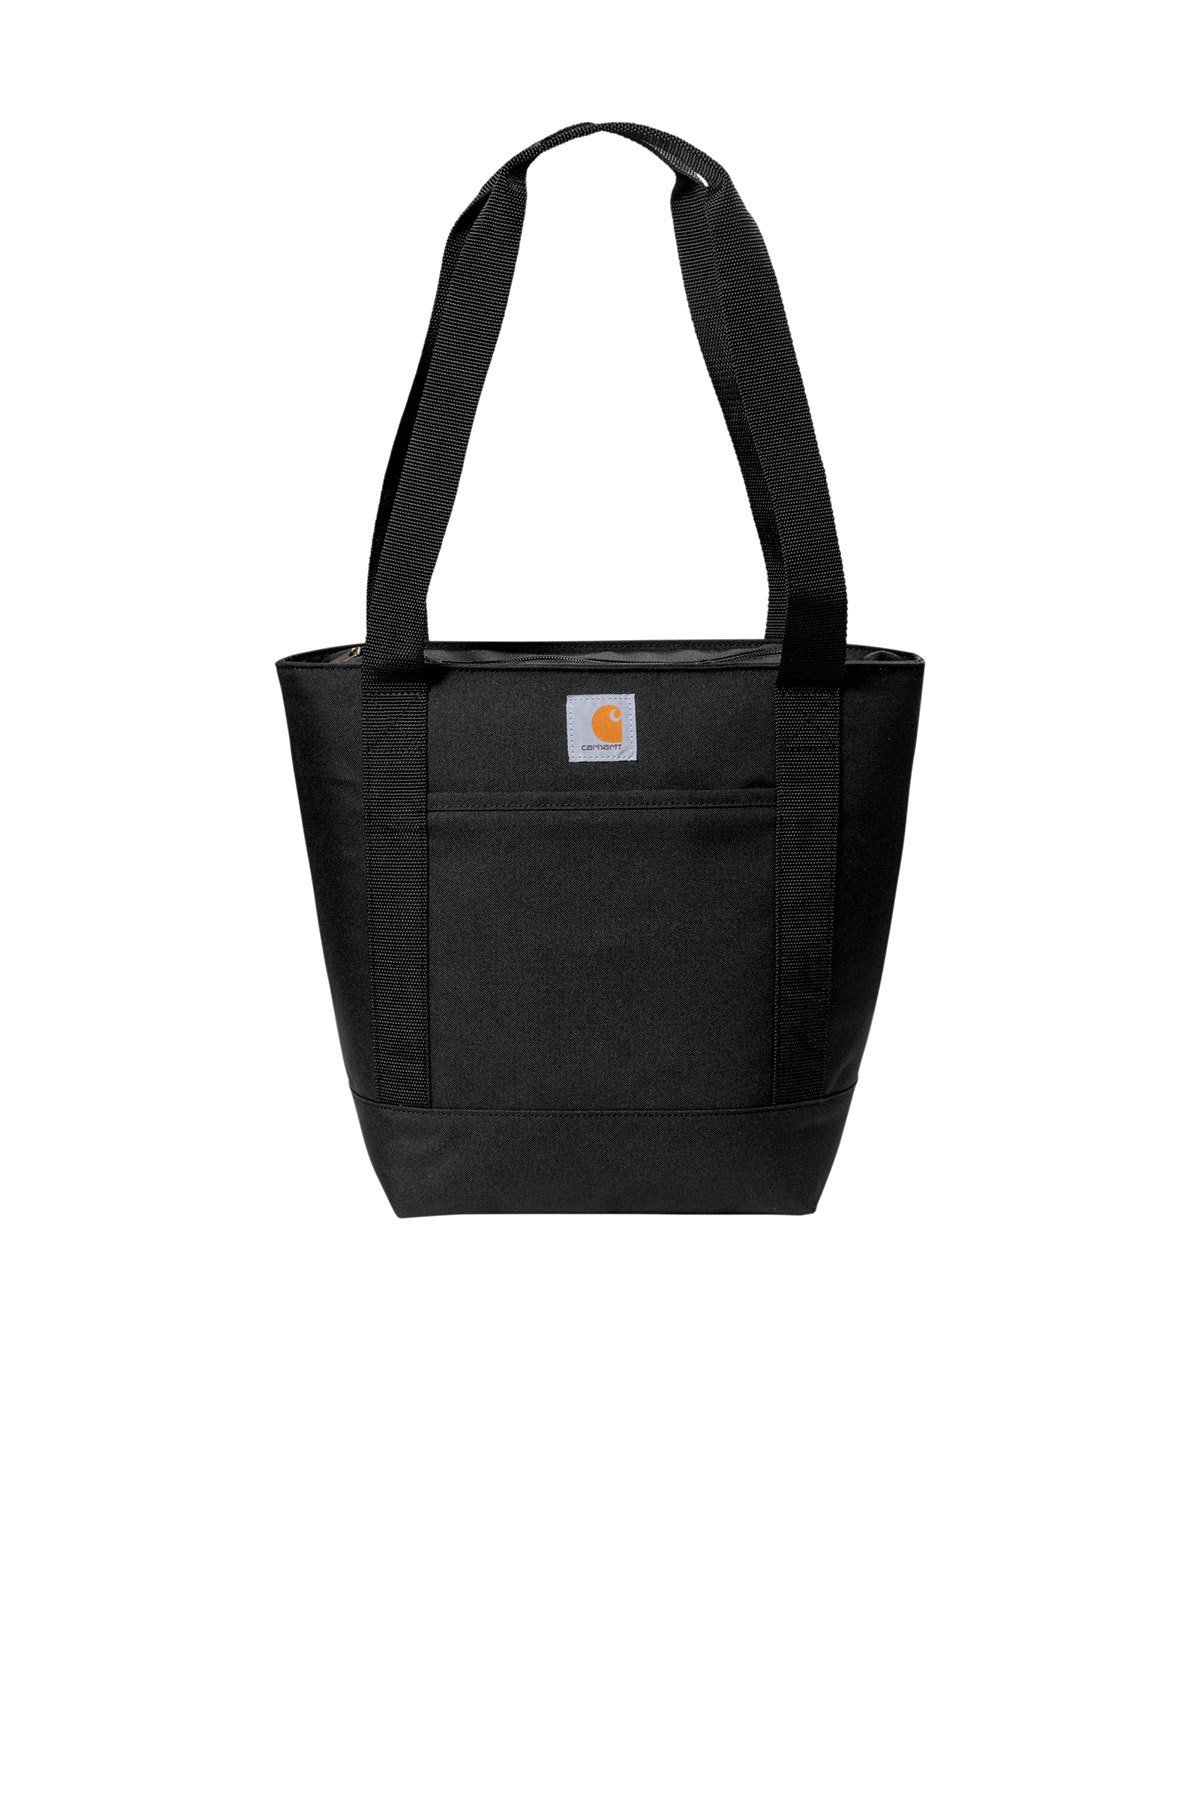 New Carhartt Signature 18 Can Picnic Lunch Insulated Tote Cooler Free Shipping 